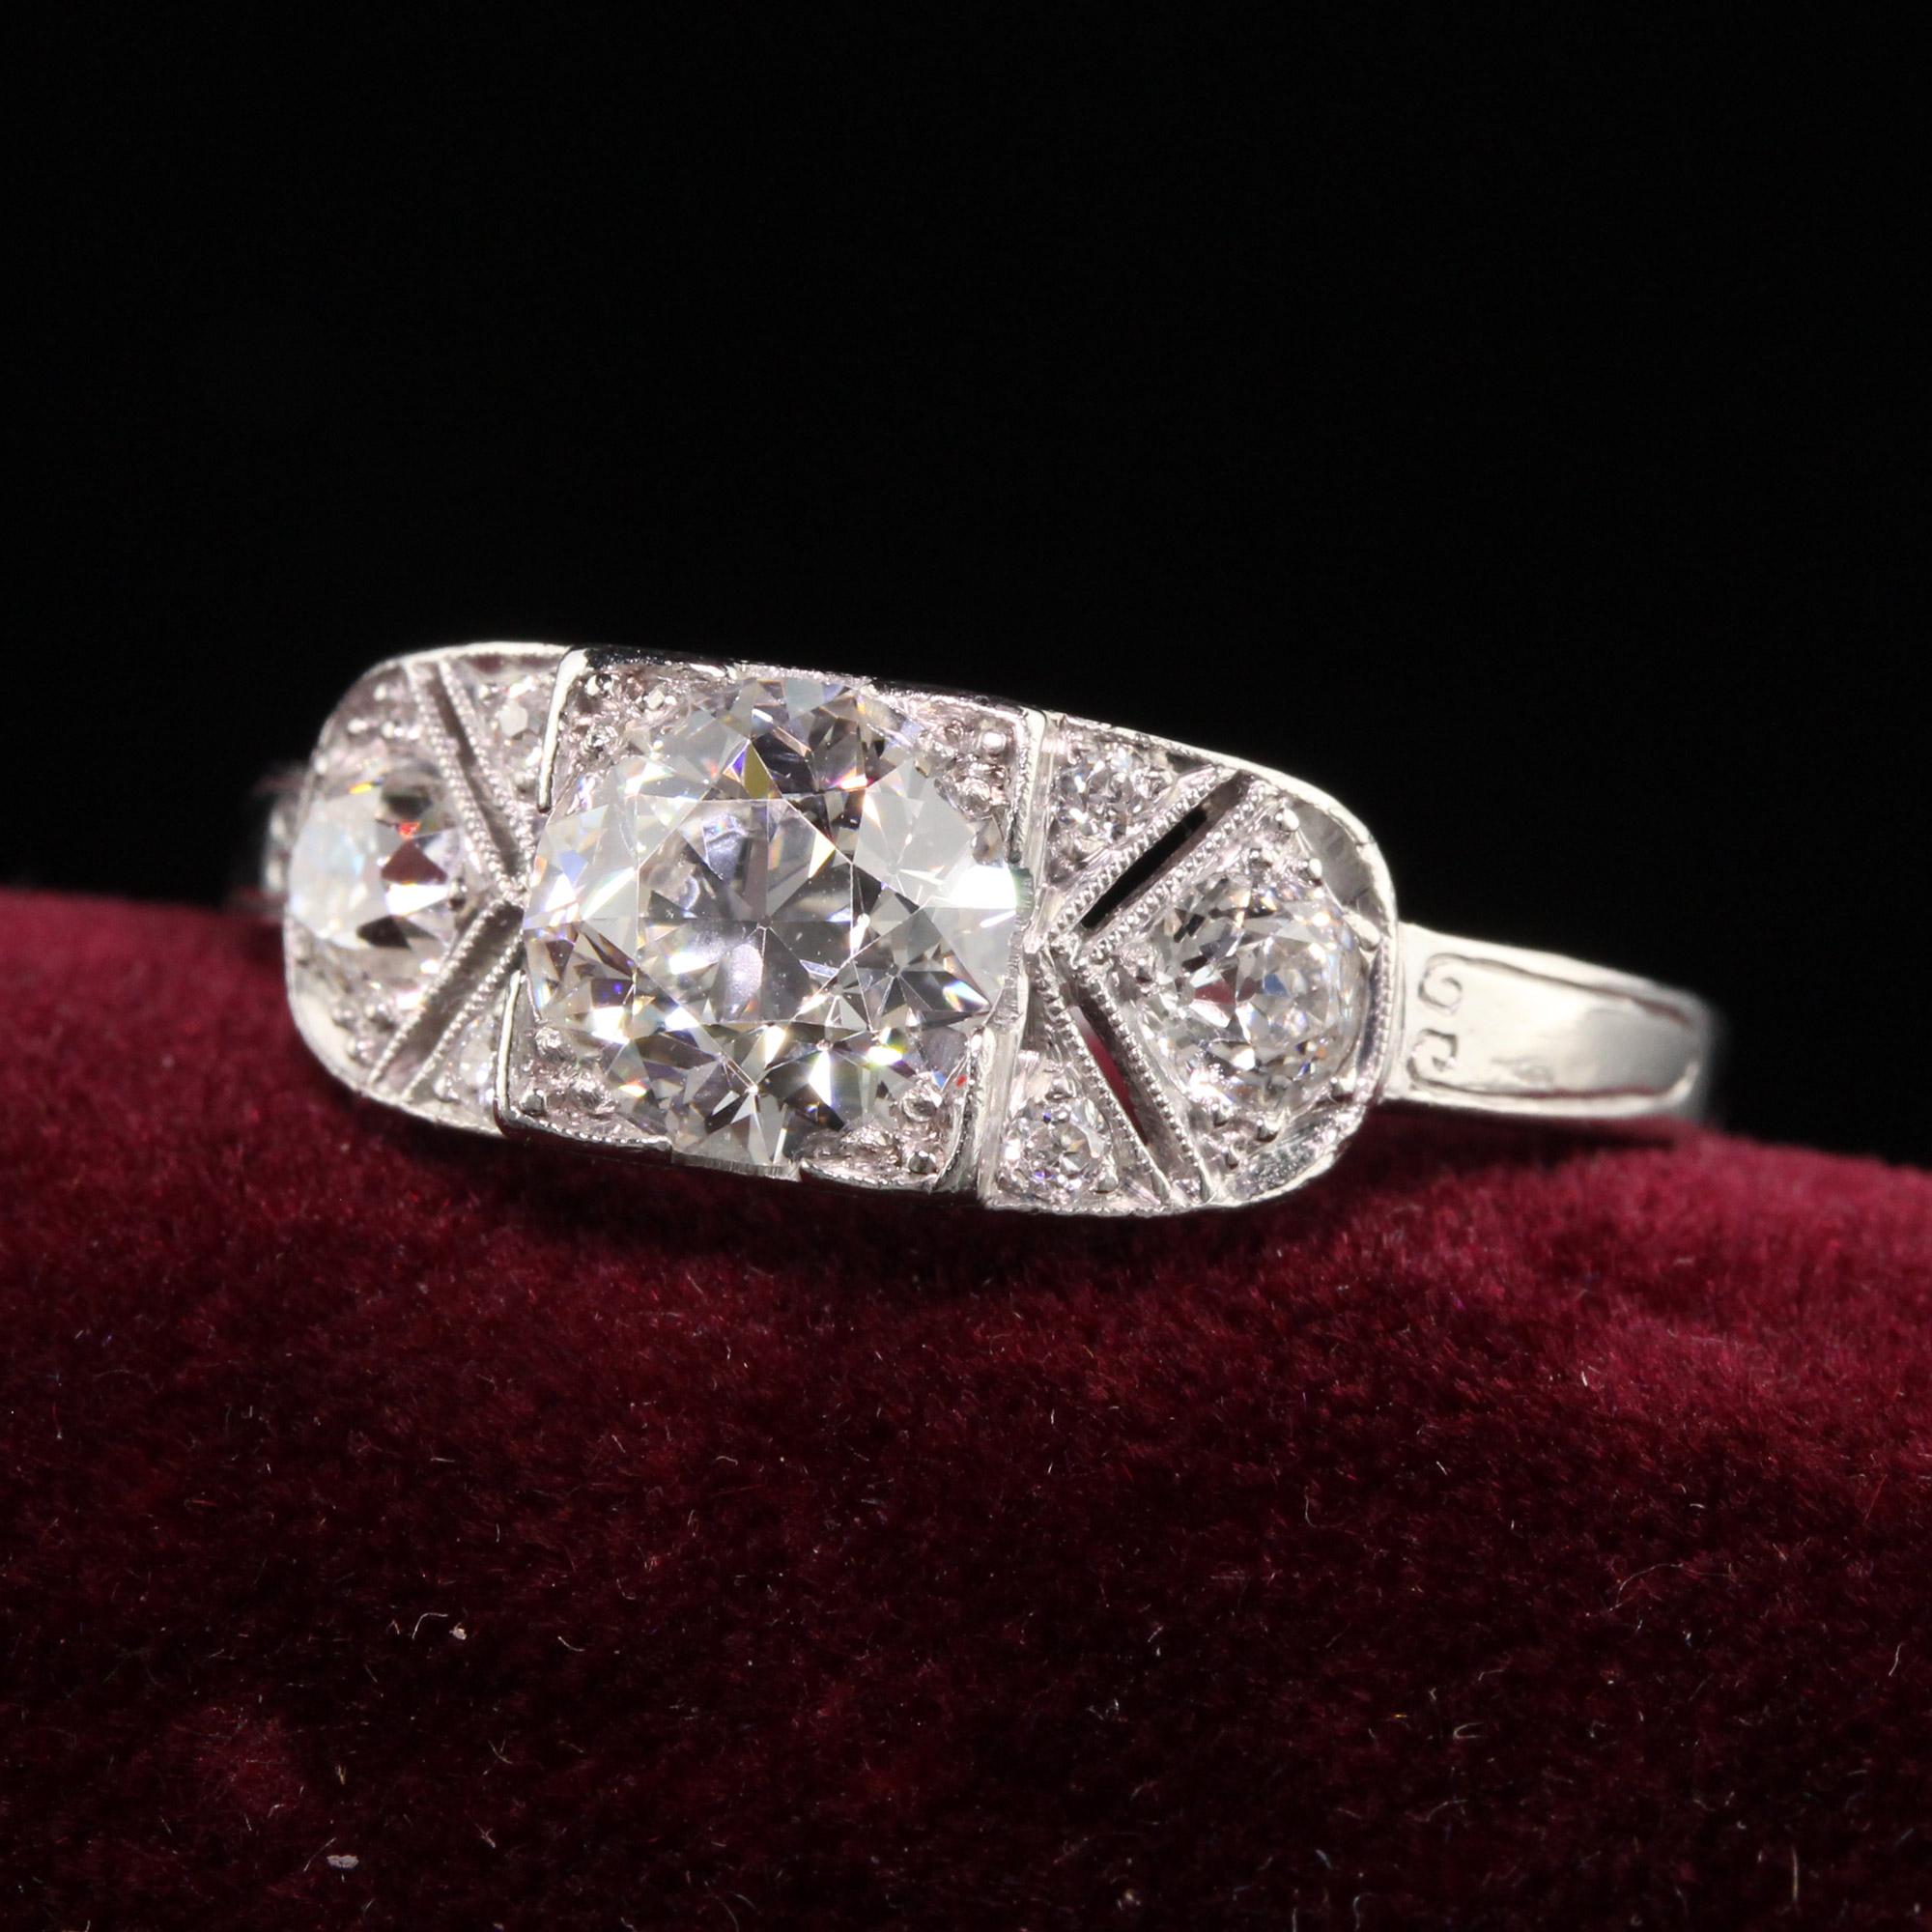 Beautiful Antique Art Deco Platinum Hall Co Old European Diamond Engagement Ring. This beautiful engagement ring is crafted in platinum. The ring is in incredible condition with fine old European cut diamonds and gallery work.

Item #R1254

Metal: